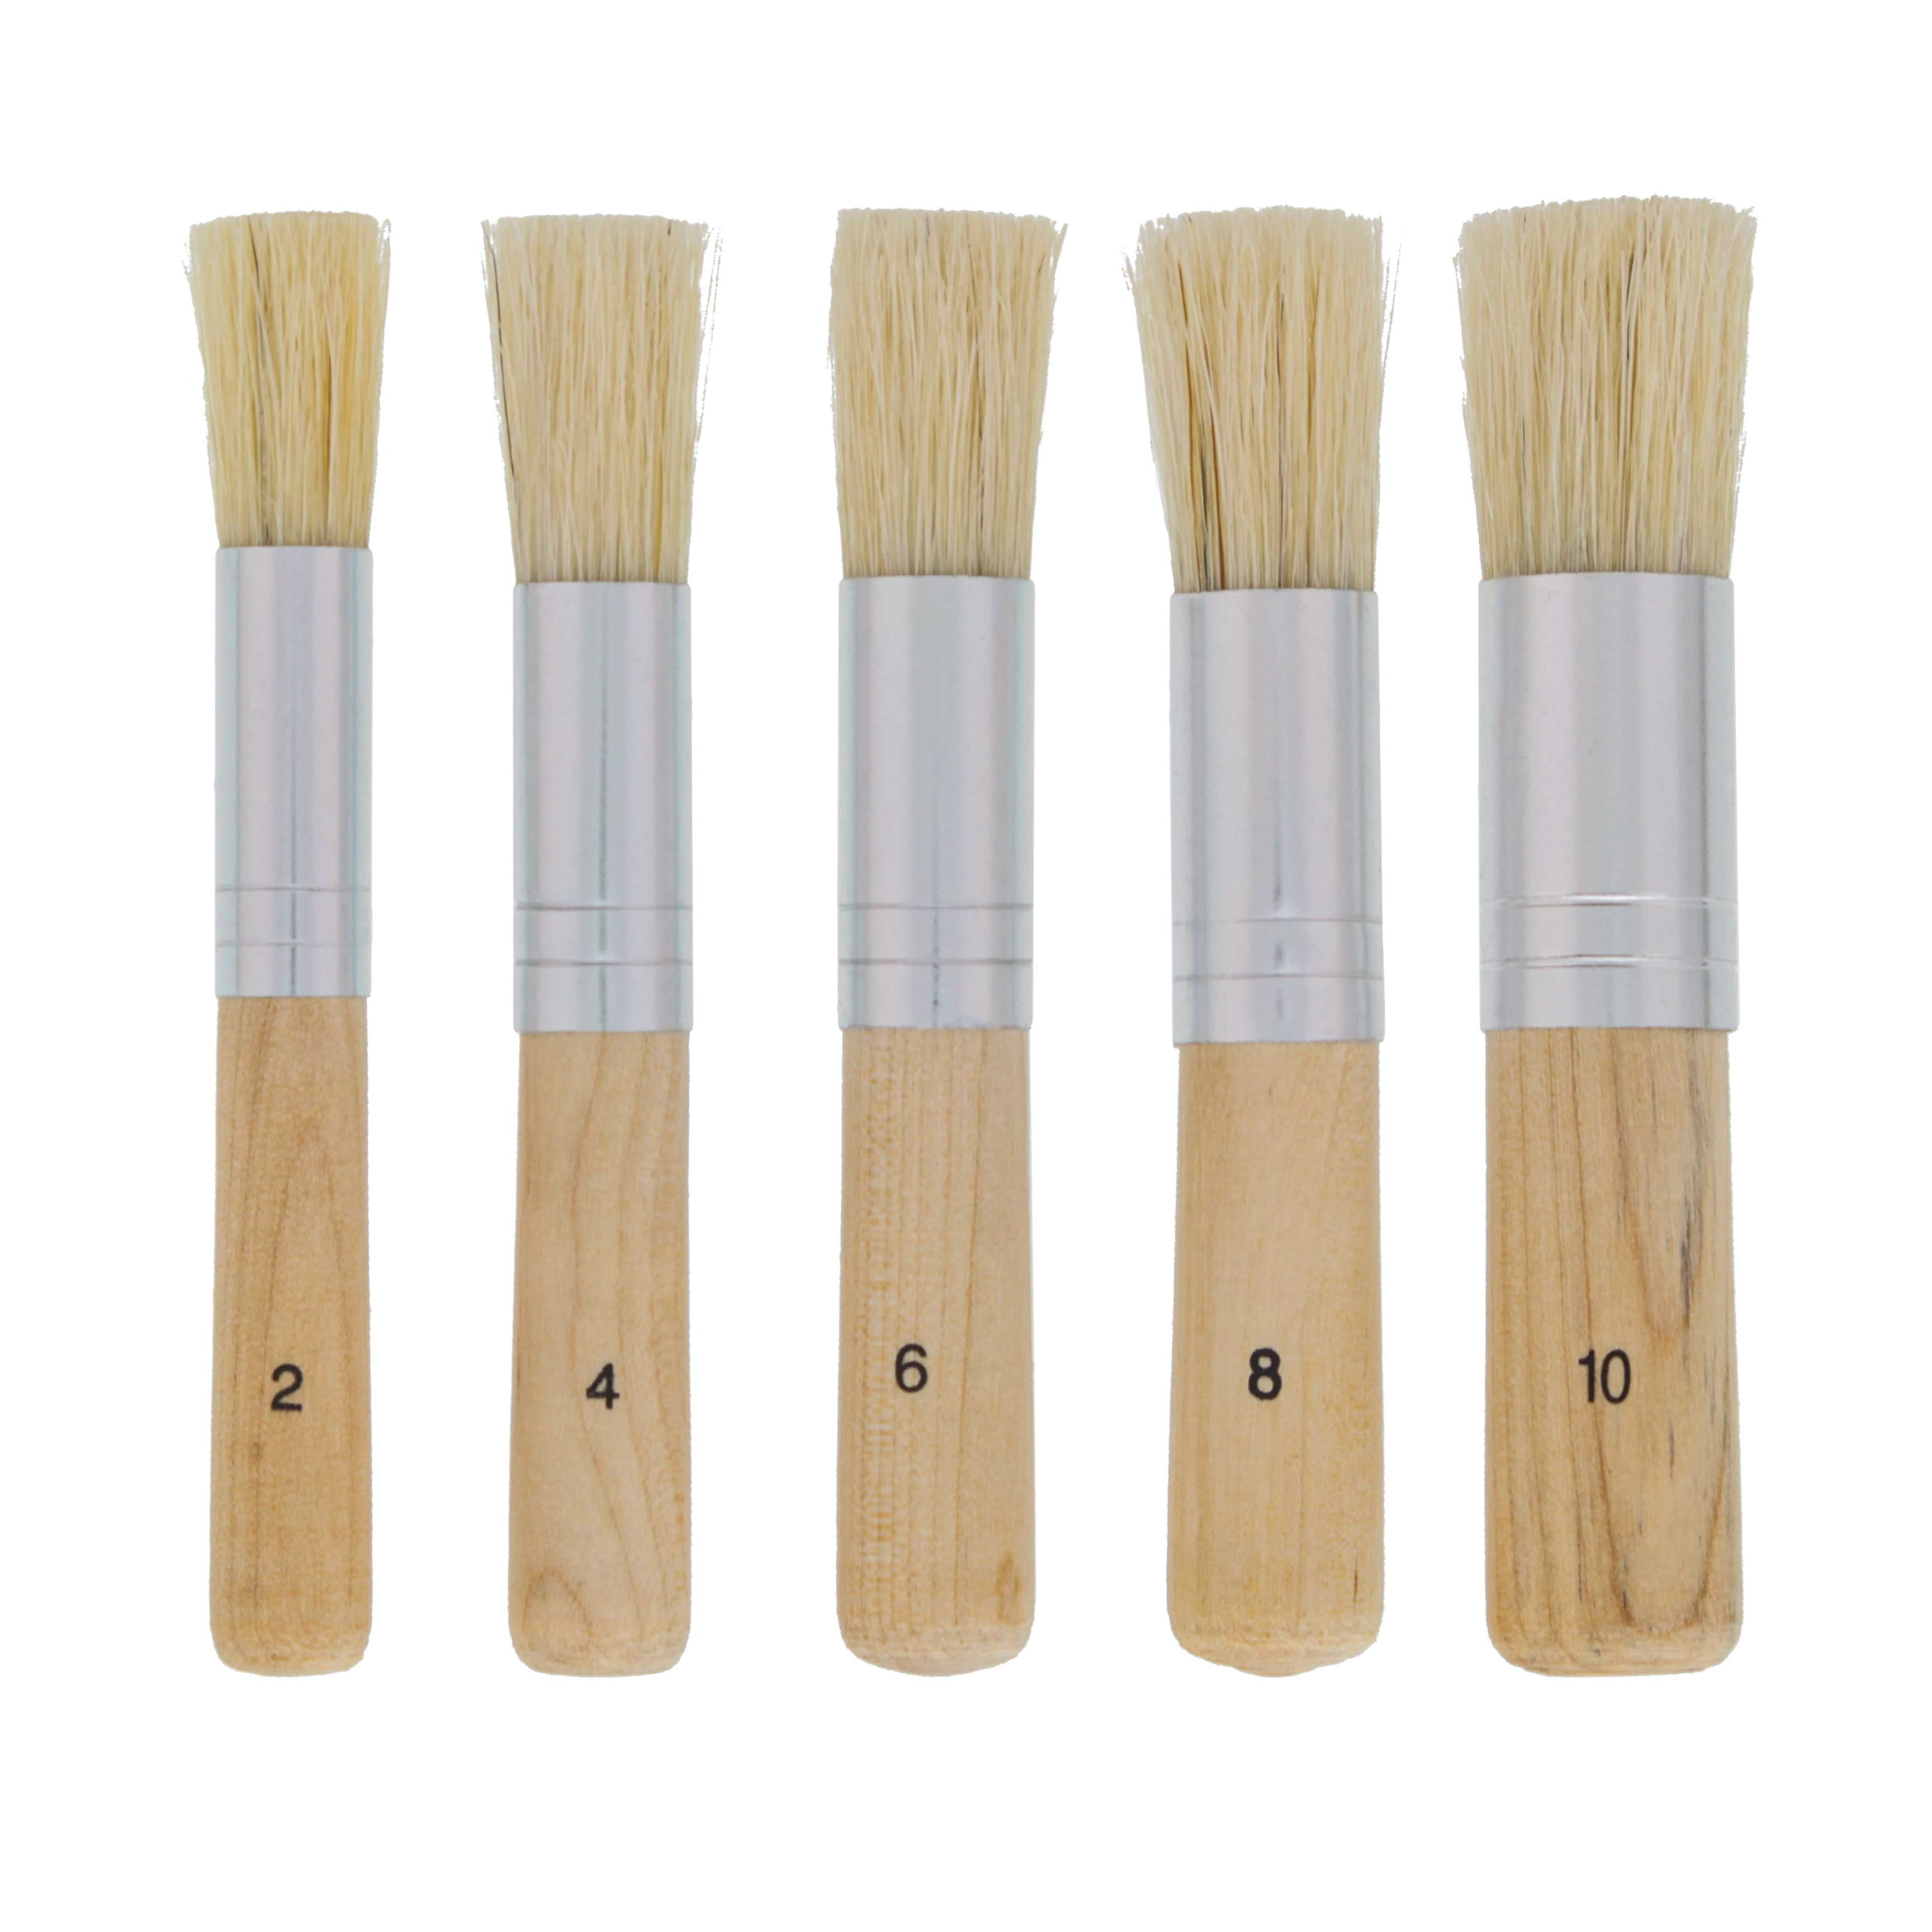 U.S. Art Supply 5 Piece Wood Handle Stencil Brush Set - Natural Bristle  Wooden Template Paint Brushes - Watercolor, Acrylic, Oil Painting - Craft,  DIY